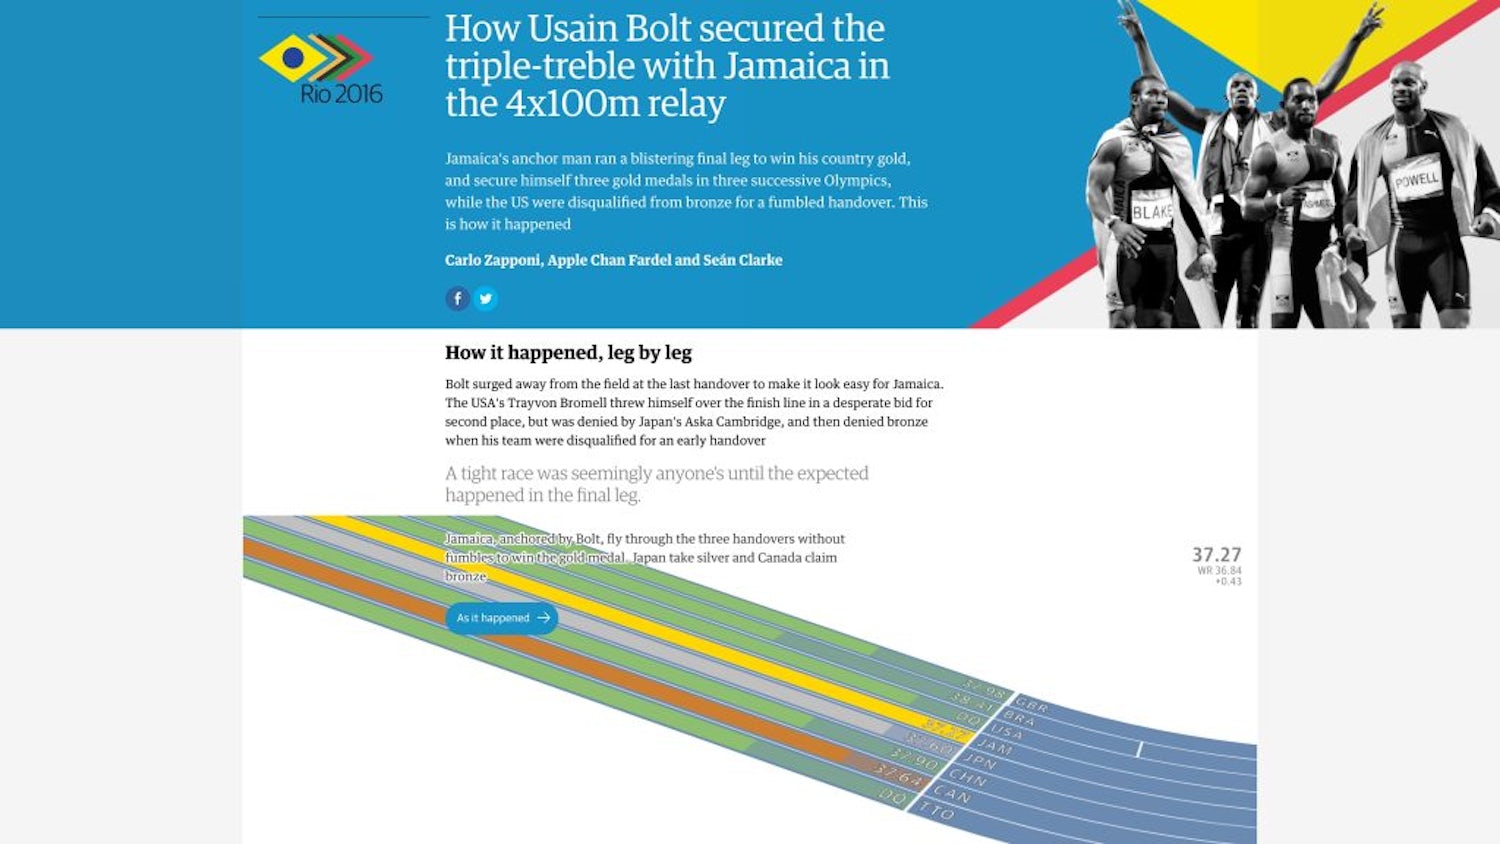 How Usain Bolt secured the triple-treble with Jamaica in the 4x100m relay landing illustrations 